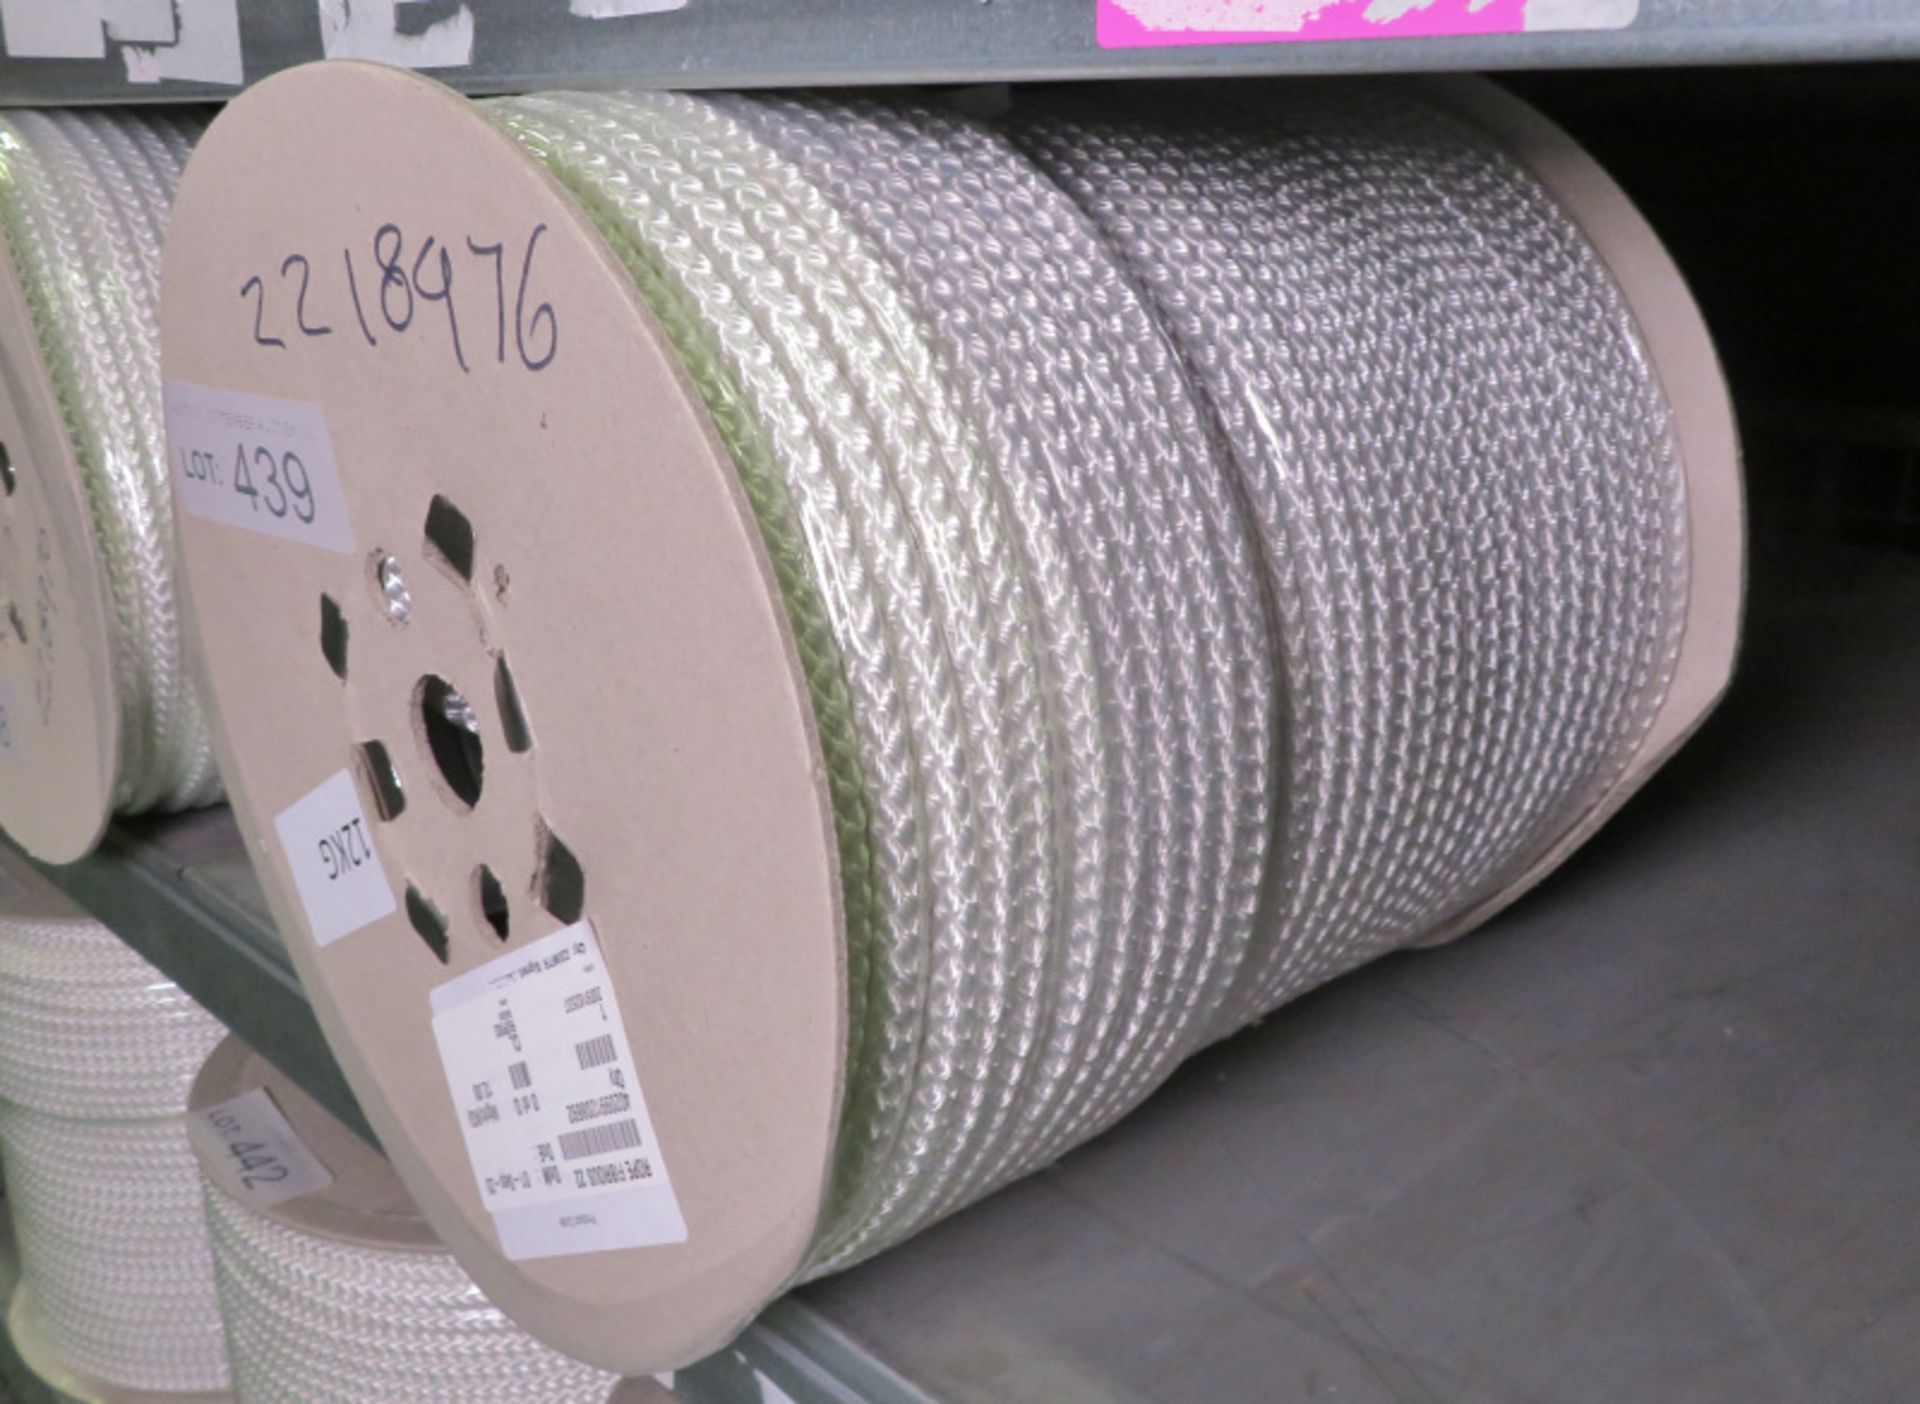 White Poly Fibrous Rope 220m x 9mm - NSN 4020-99-120-8692 - weight 12kg - Image 2 of 2